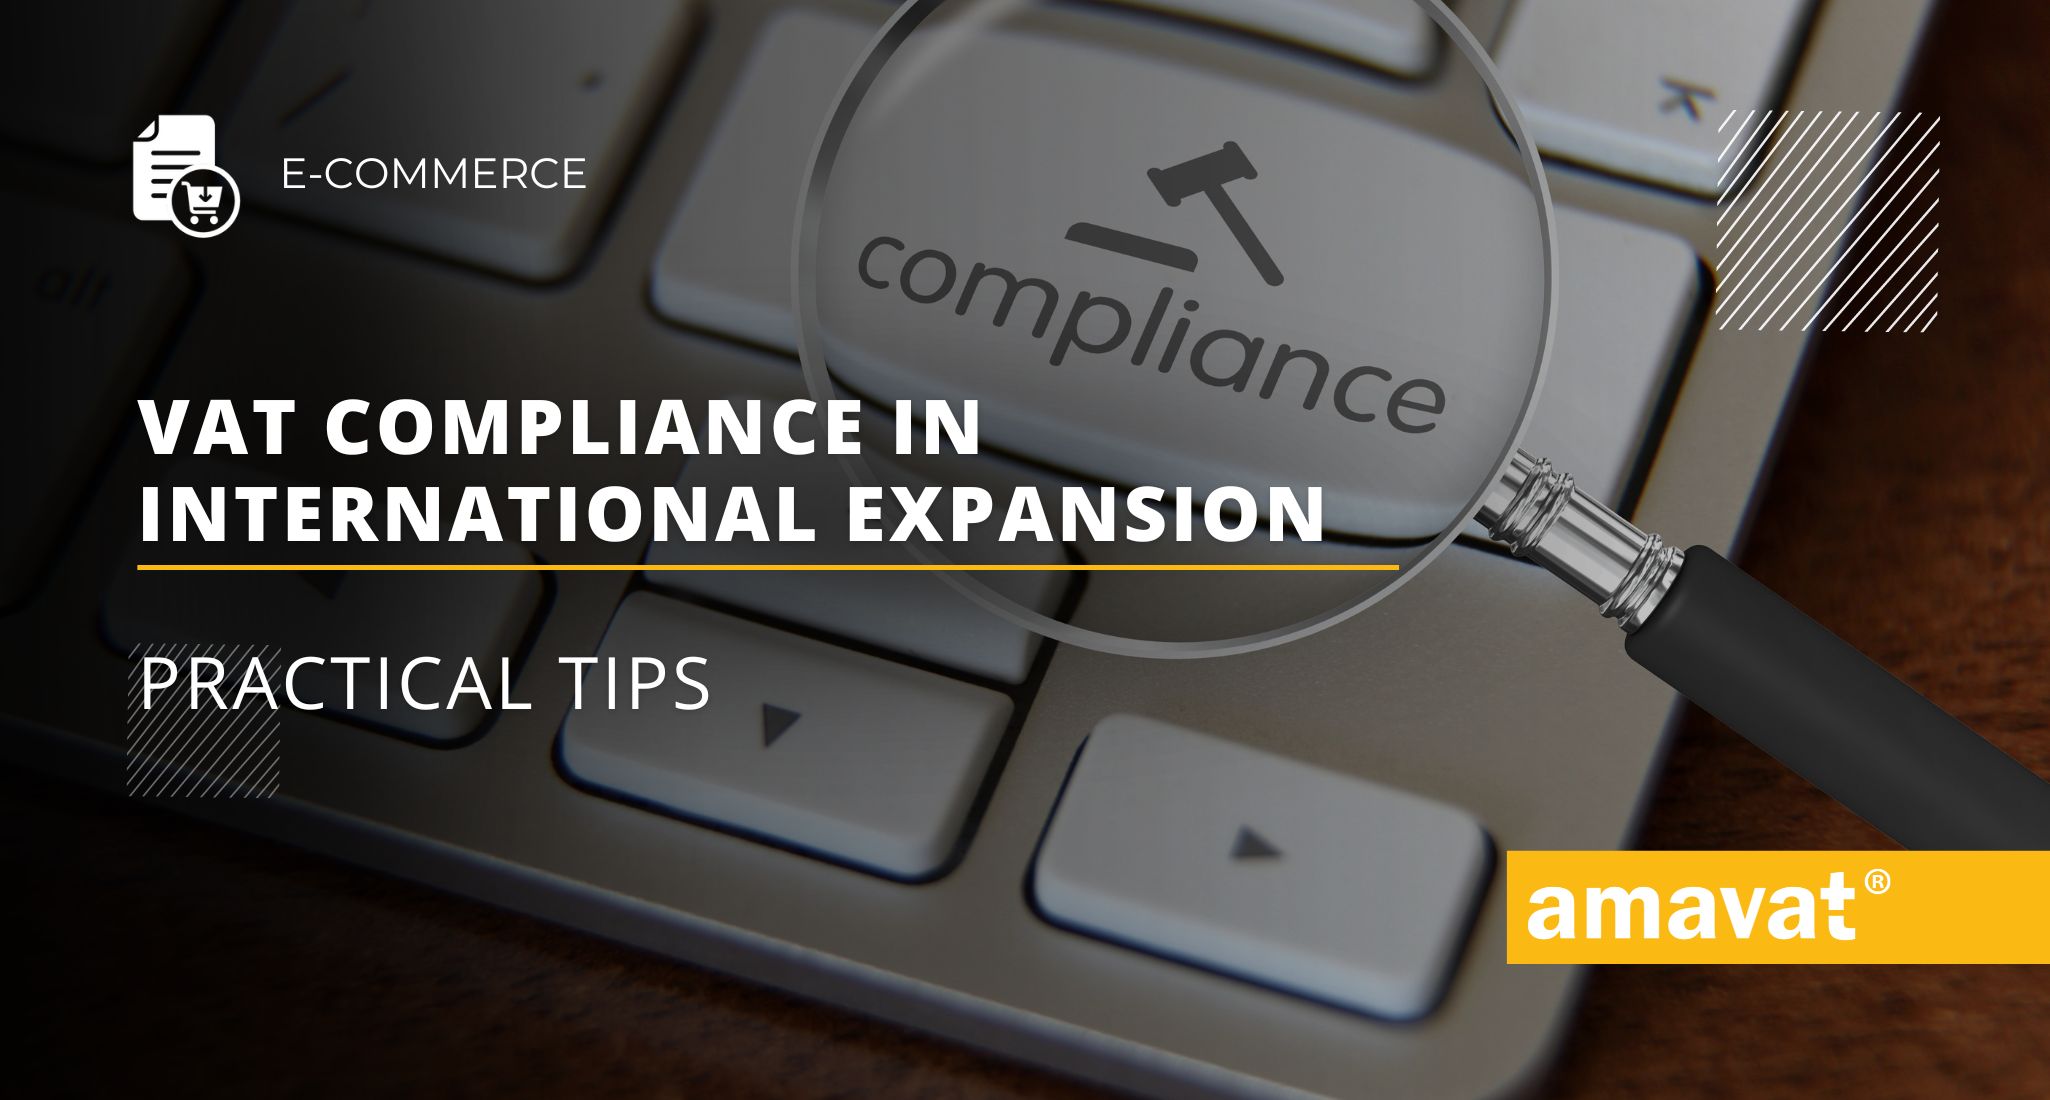 VAT Compliance in international expansion: Practical tips